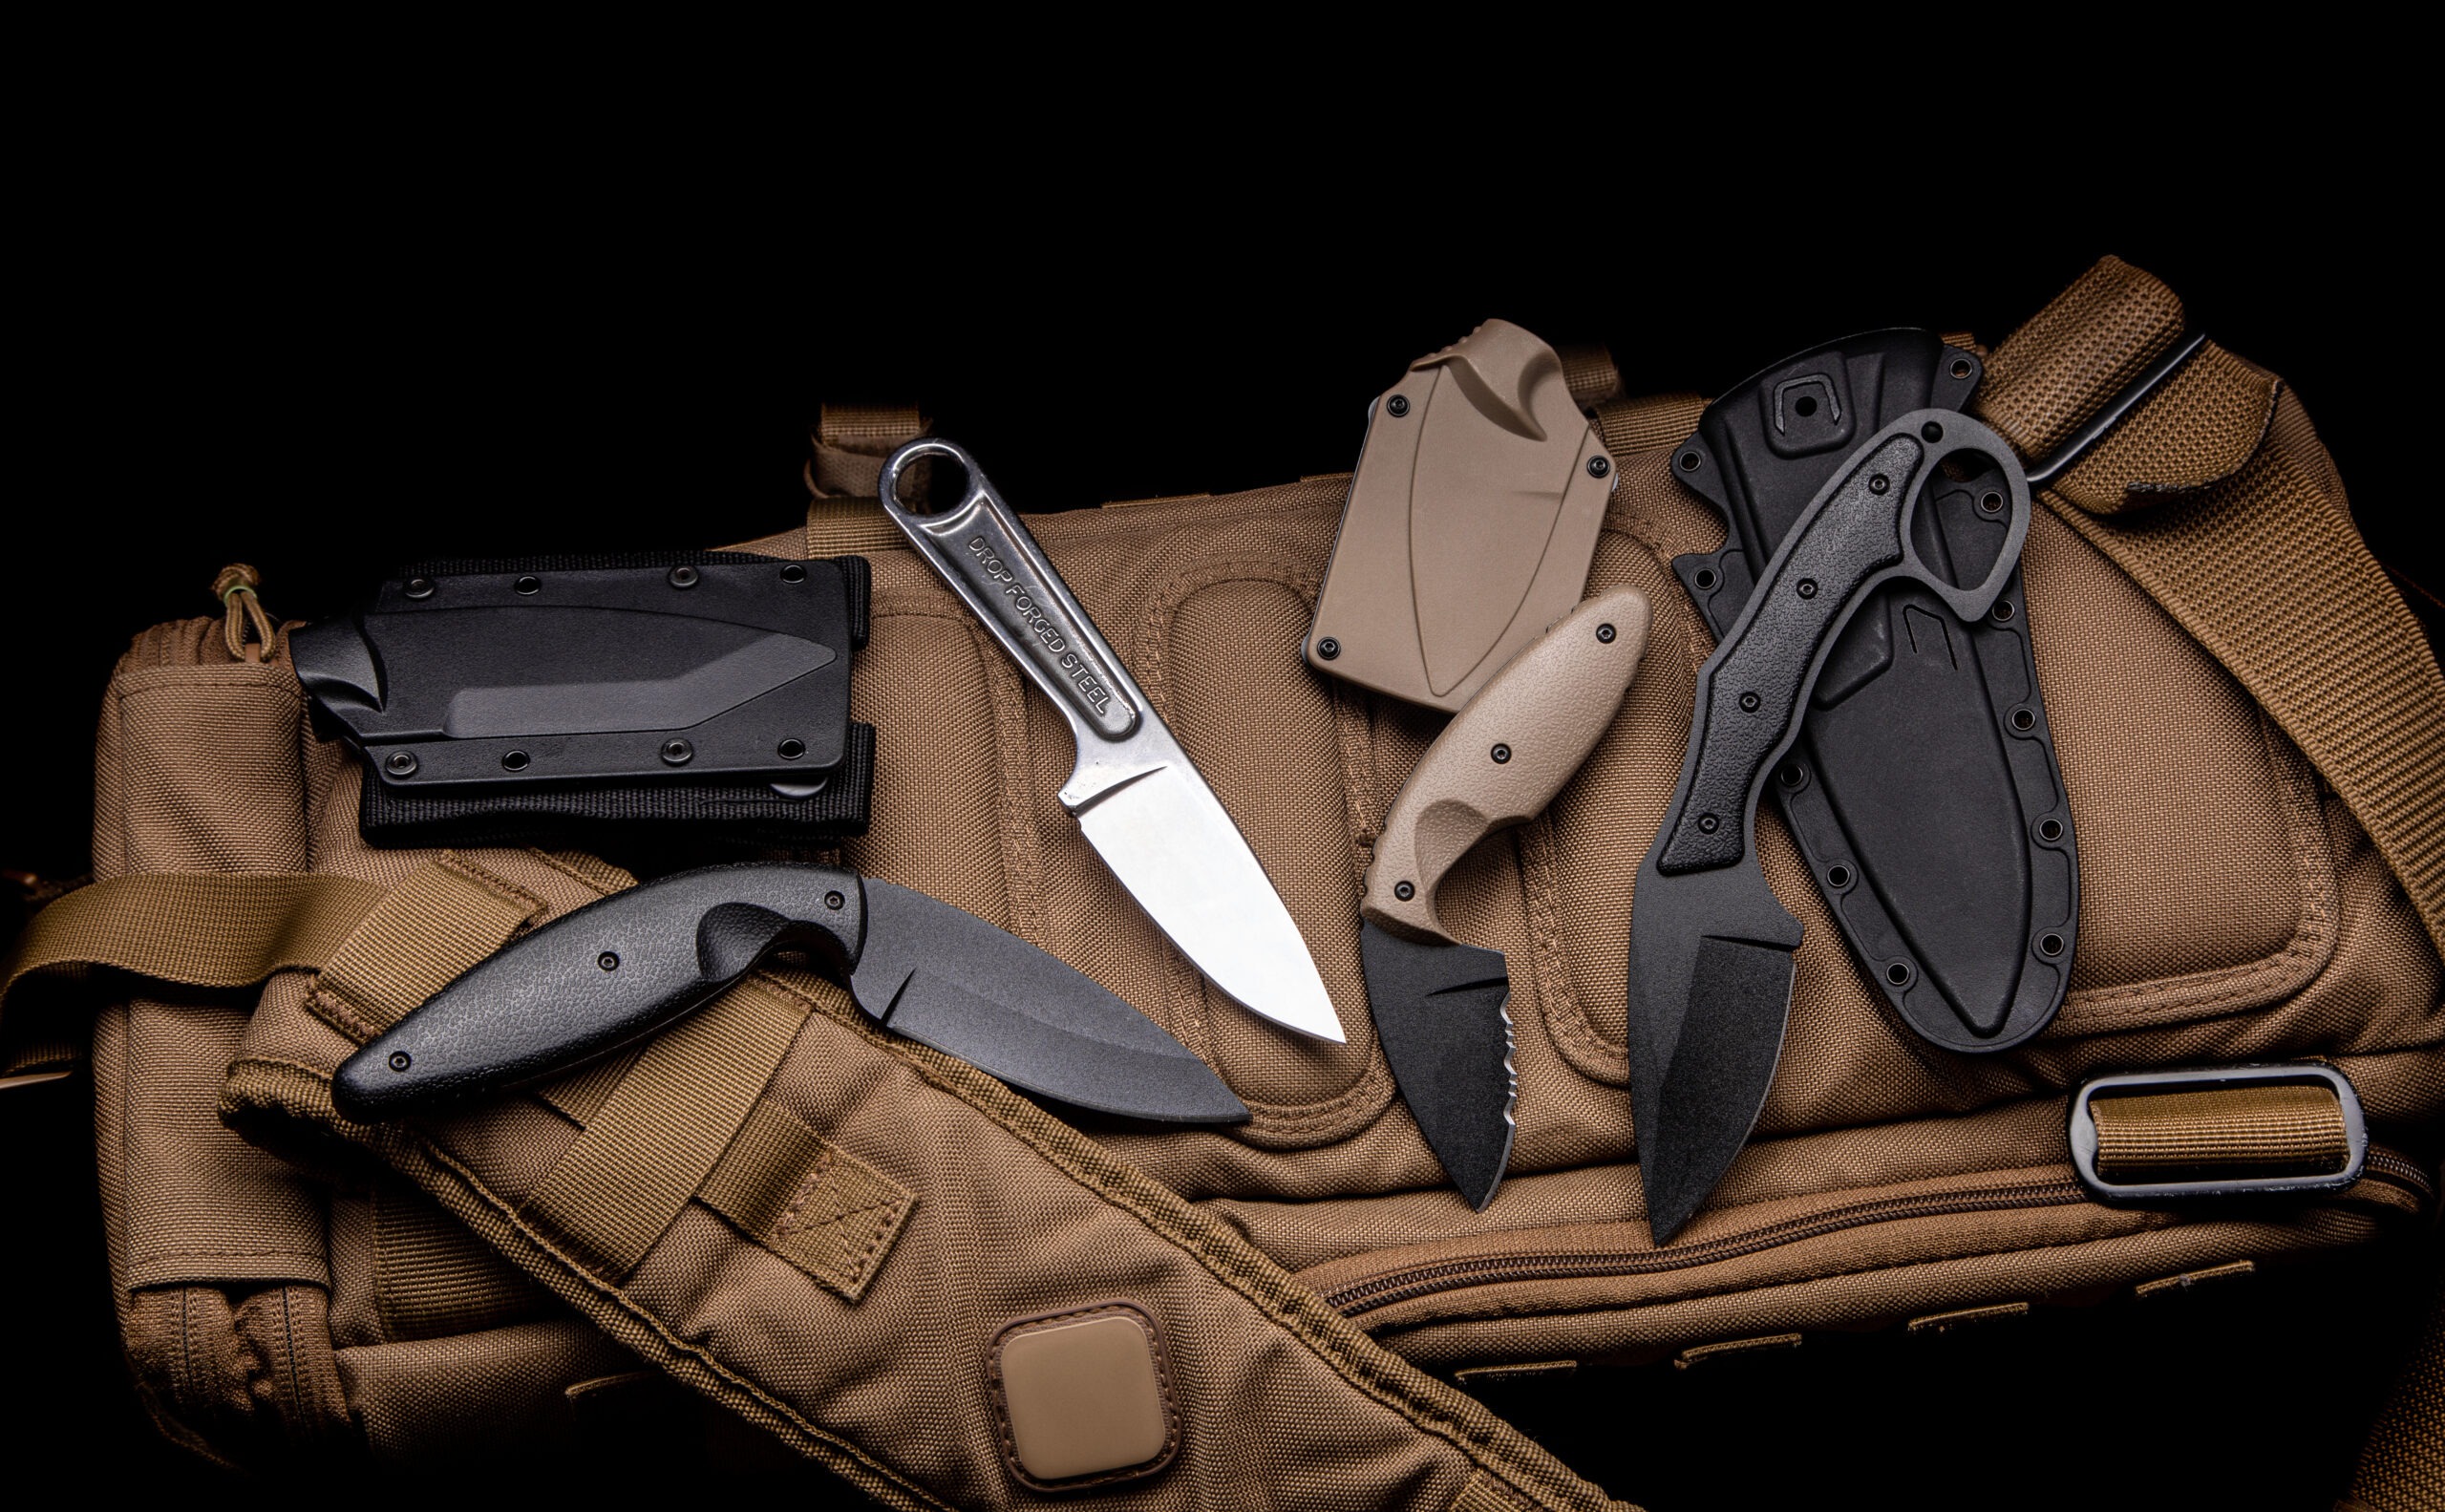 A variety of knives on a sand-colored military backpack. Dark background